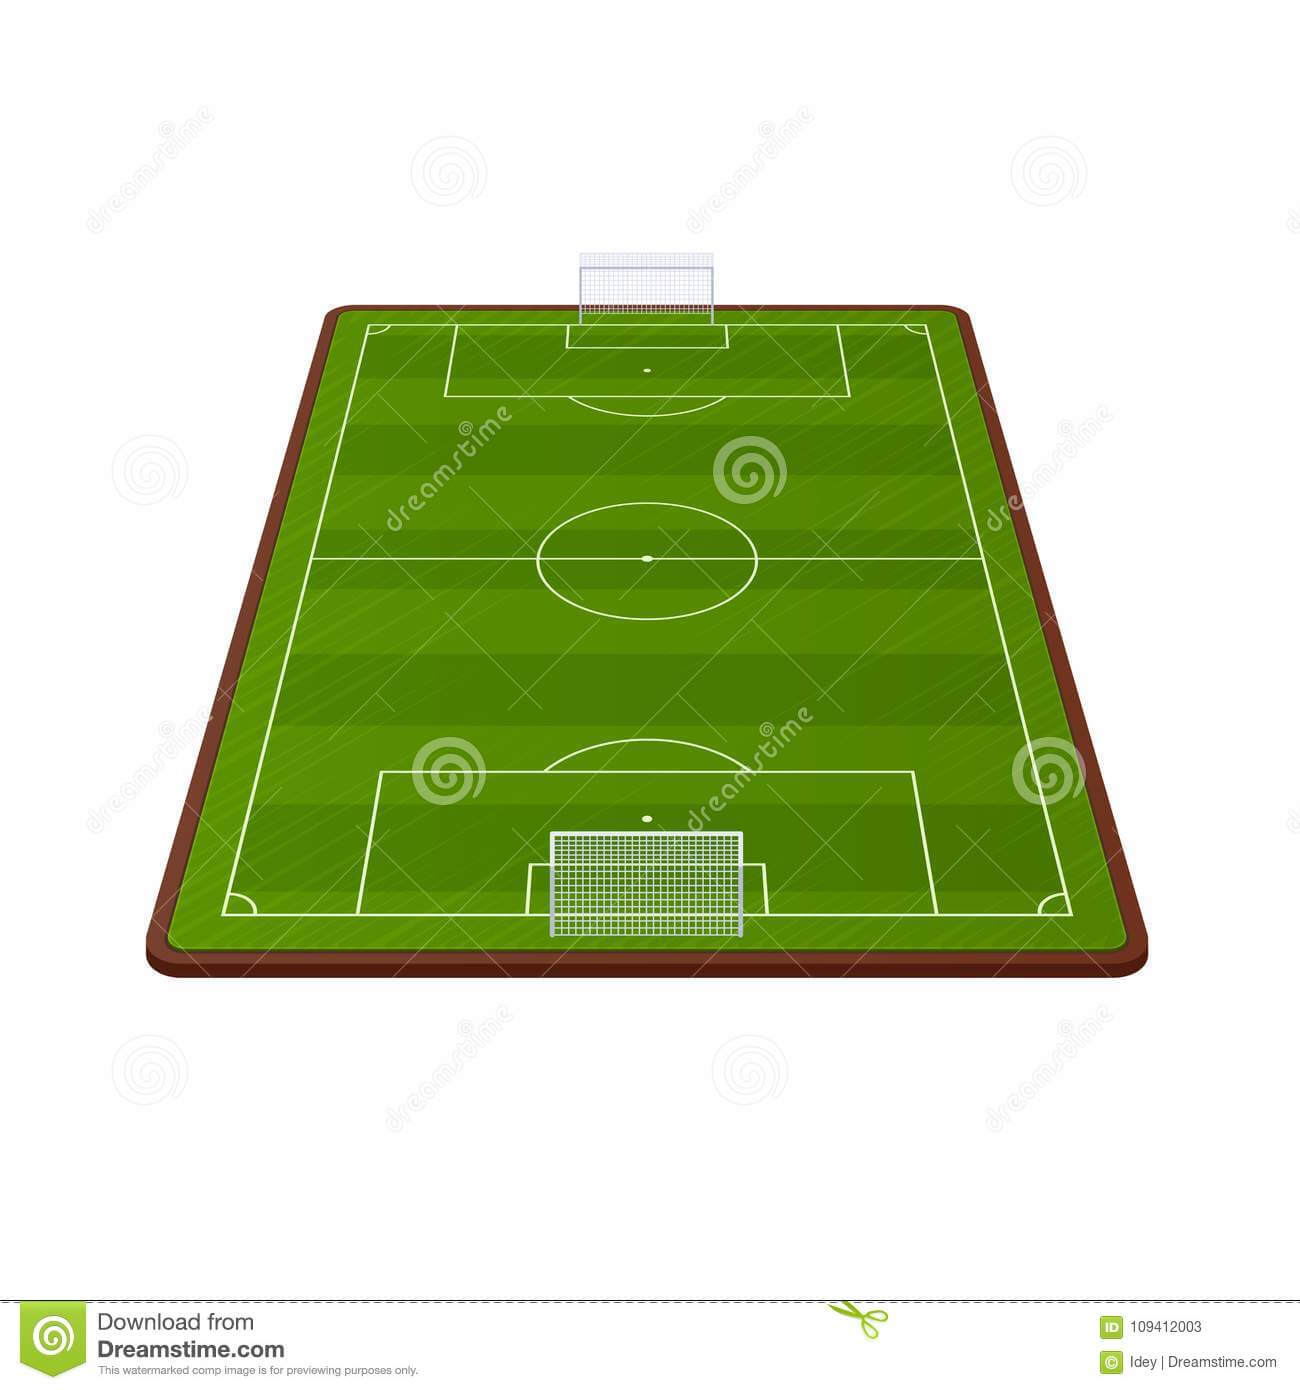 Realistic Football Field Template, Playground With Green In Blank Football Field Template